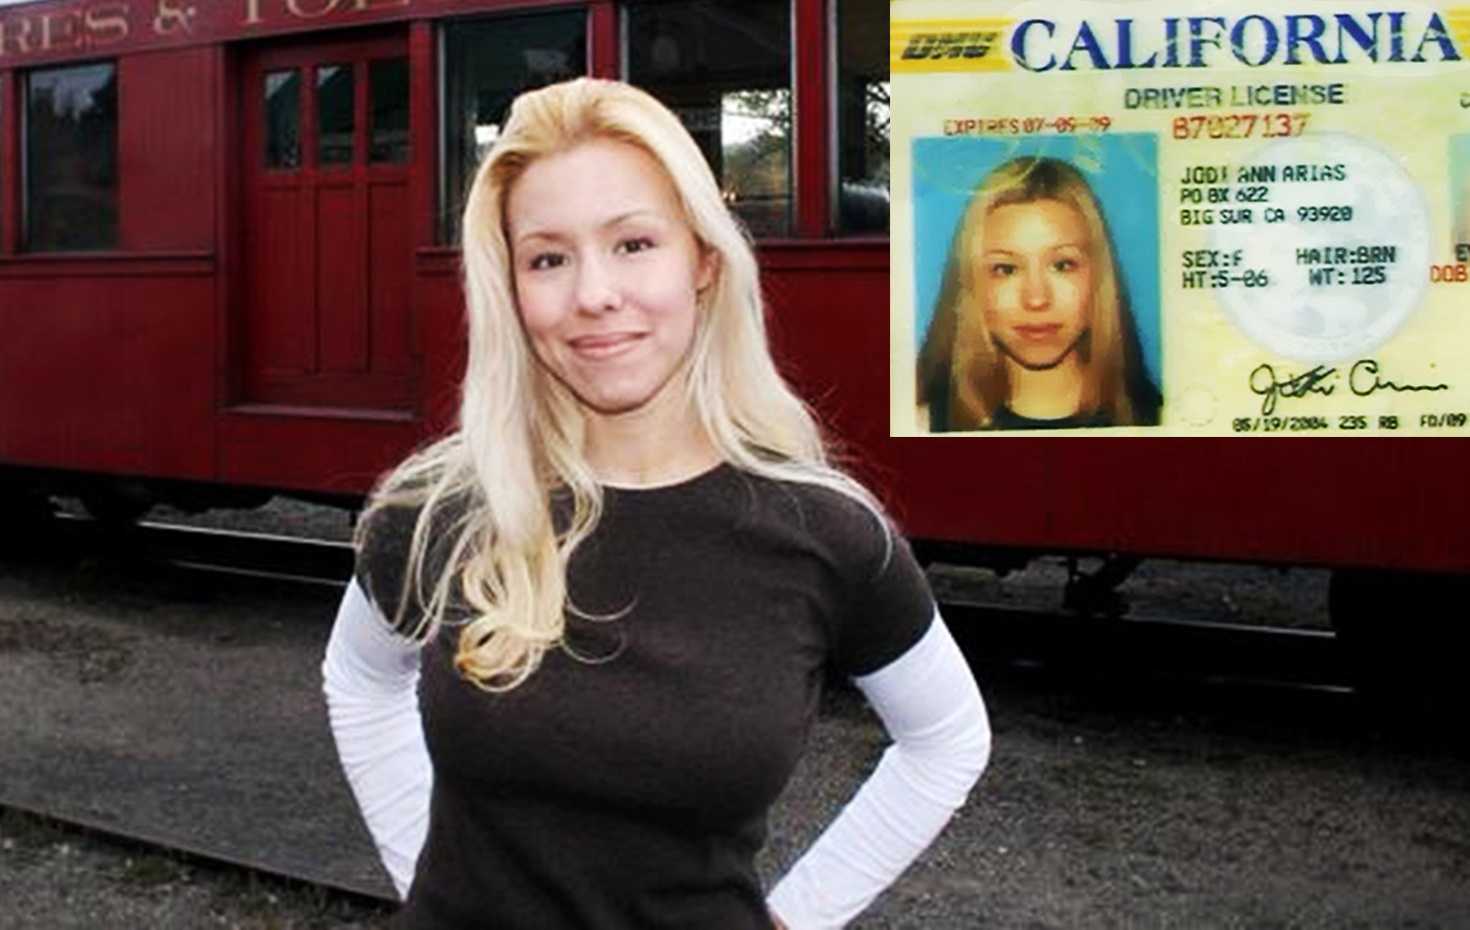 Why does Jodi Arias drivers license say she lives in Big Sur?